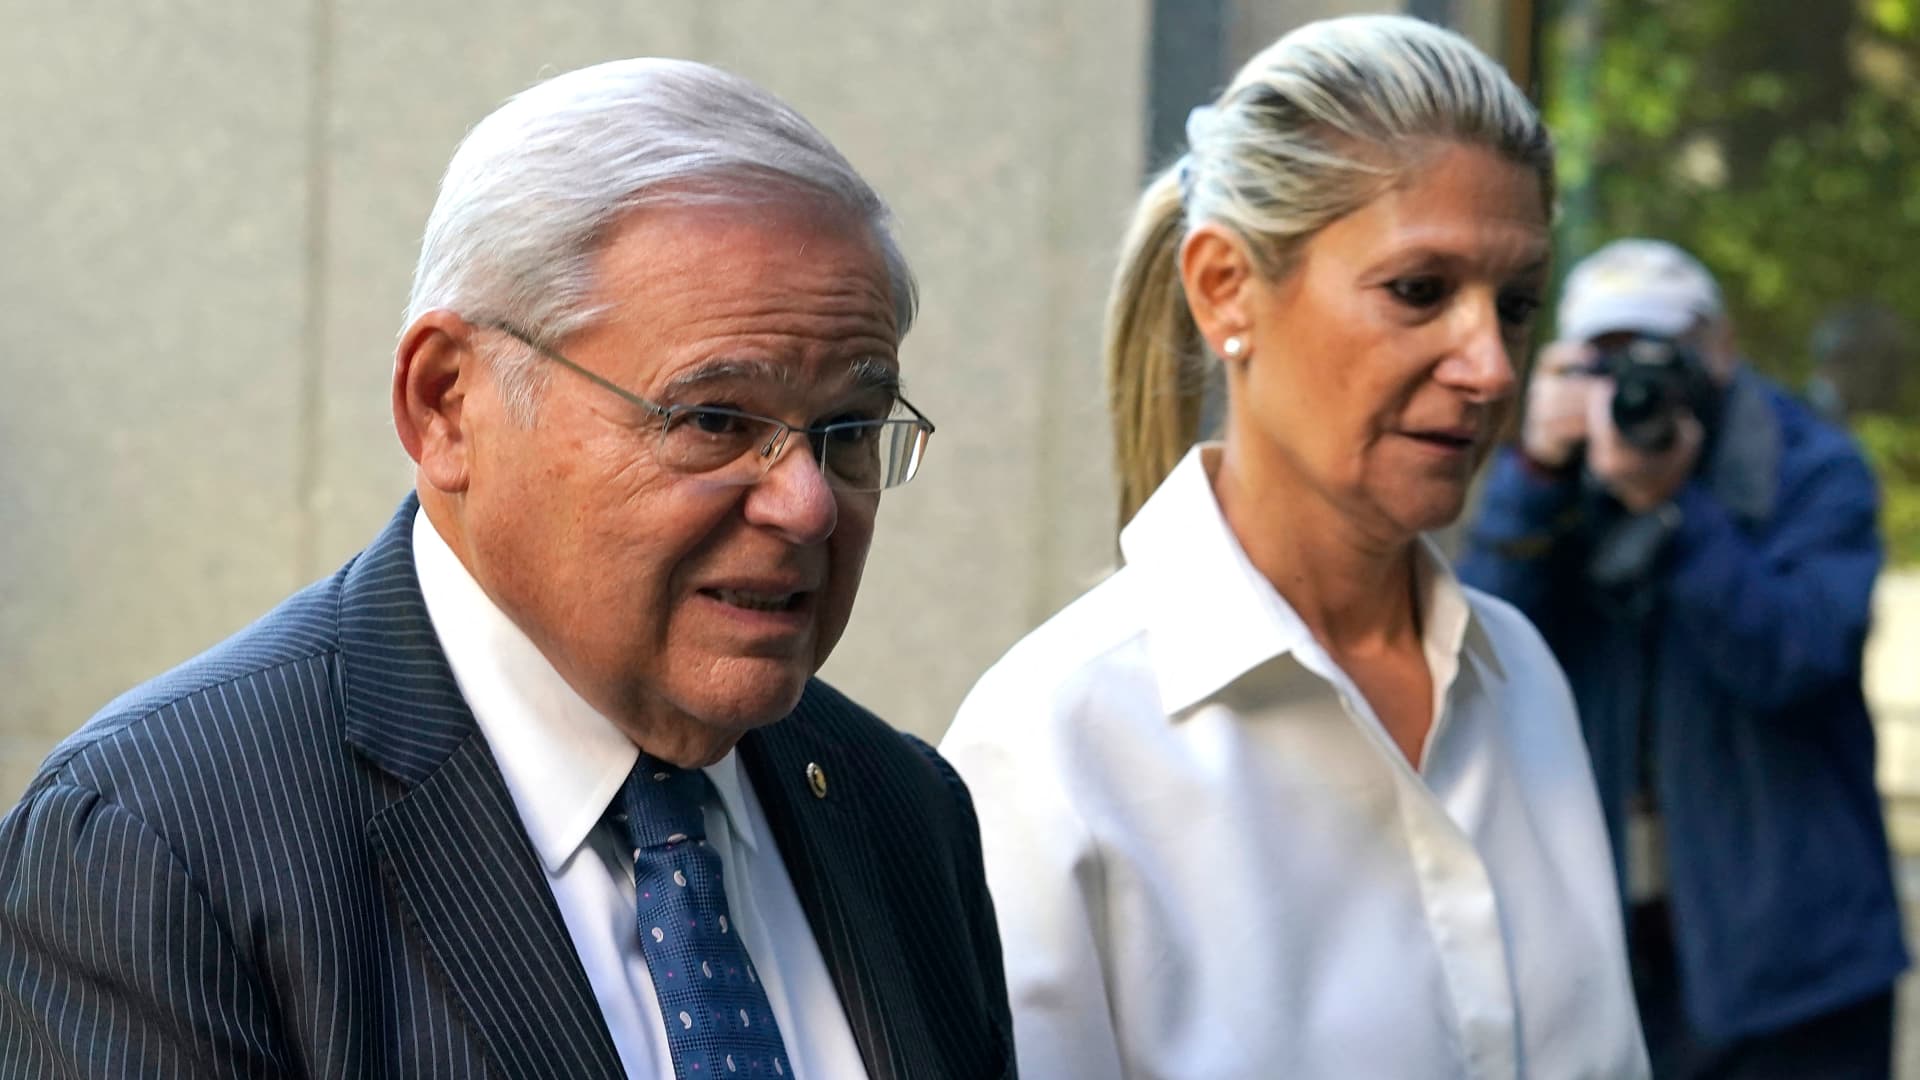 Sen. Menendez’s wife has breast cancer, he reveals at corruption trial [Video]